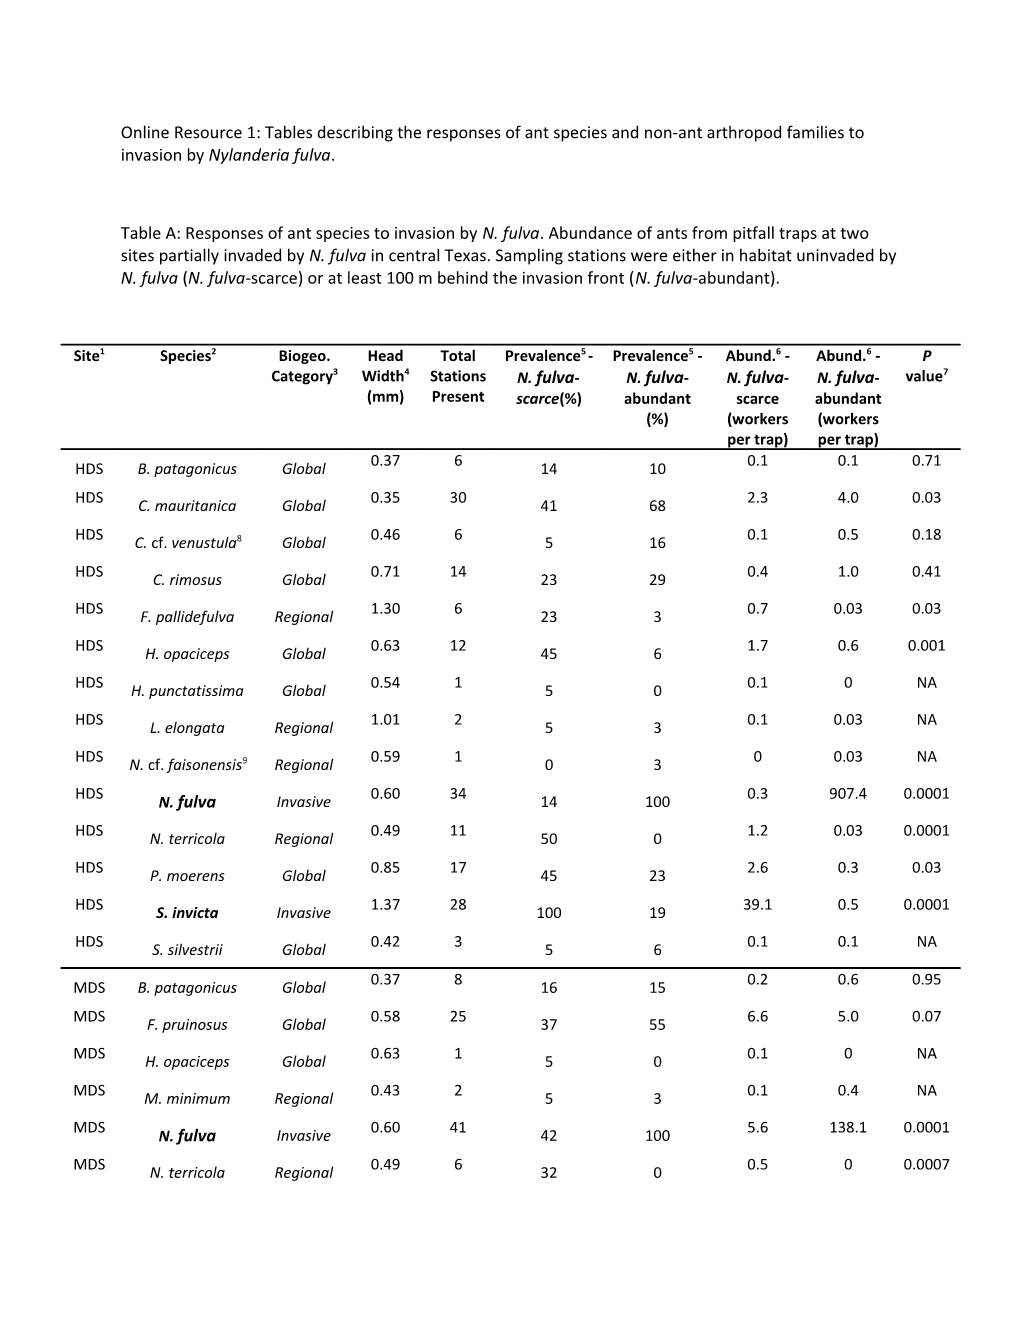 Online Resource 1: Tables Describing the Responses of Ant Species and Non-Ant Arthropod